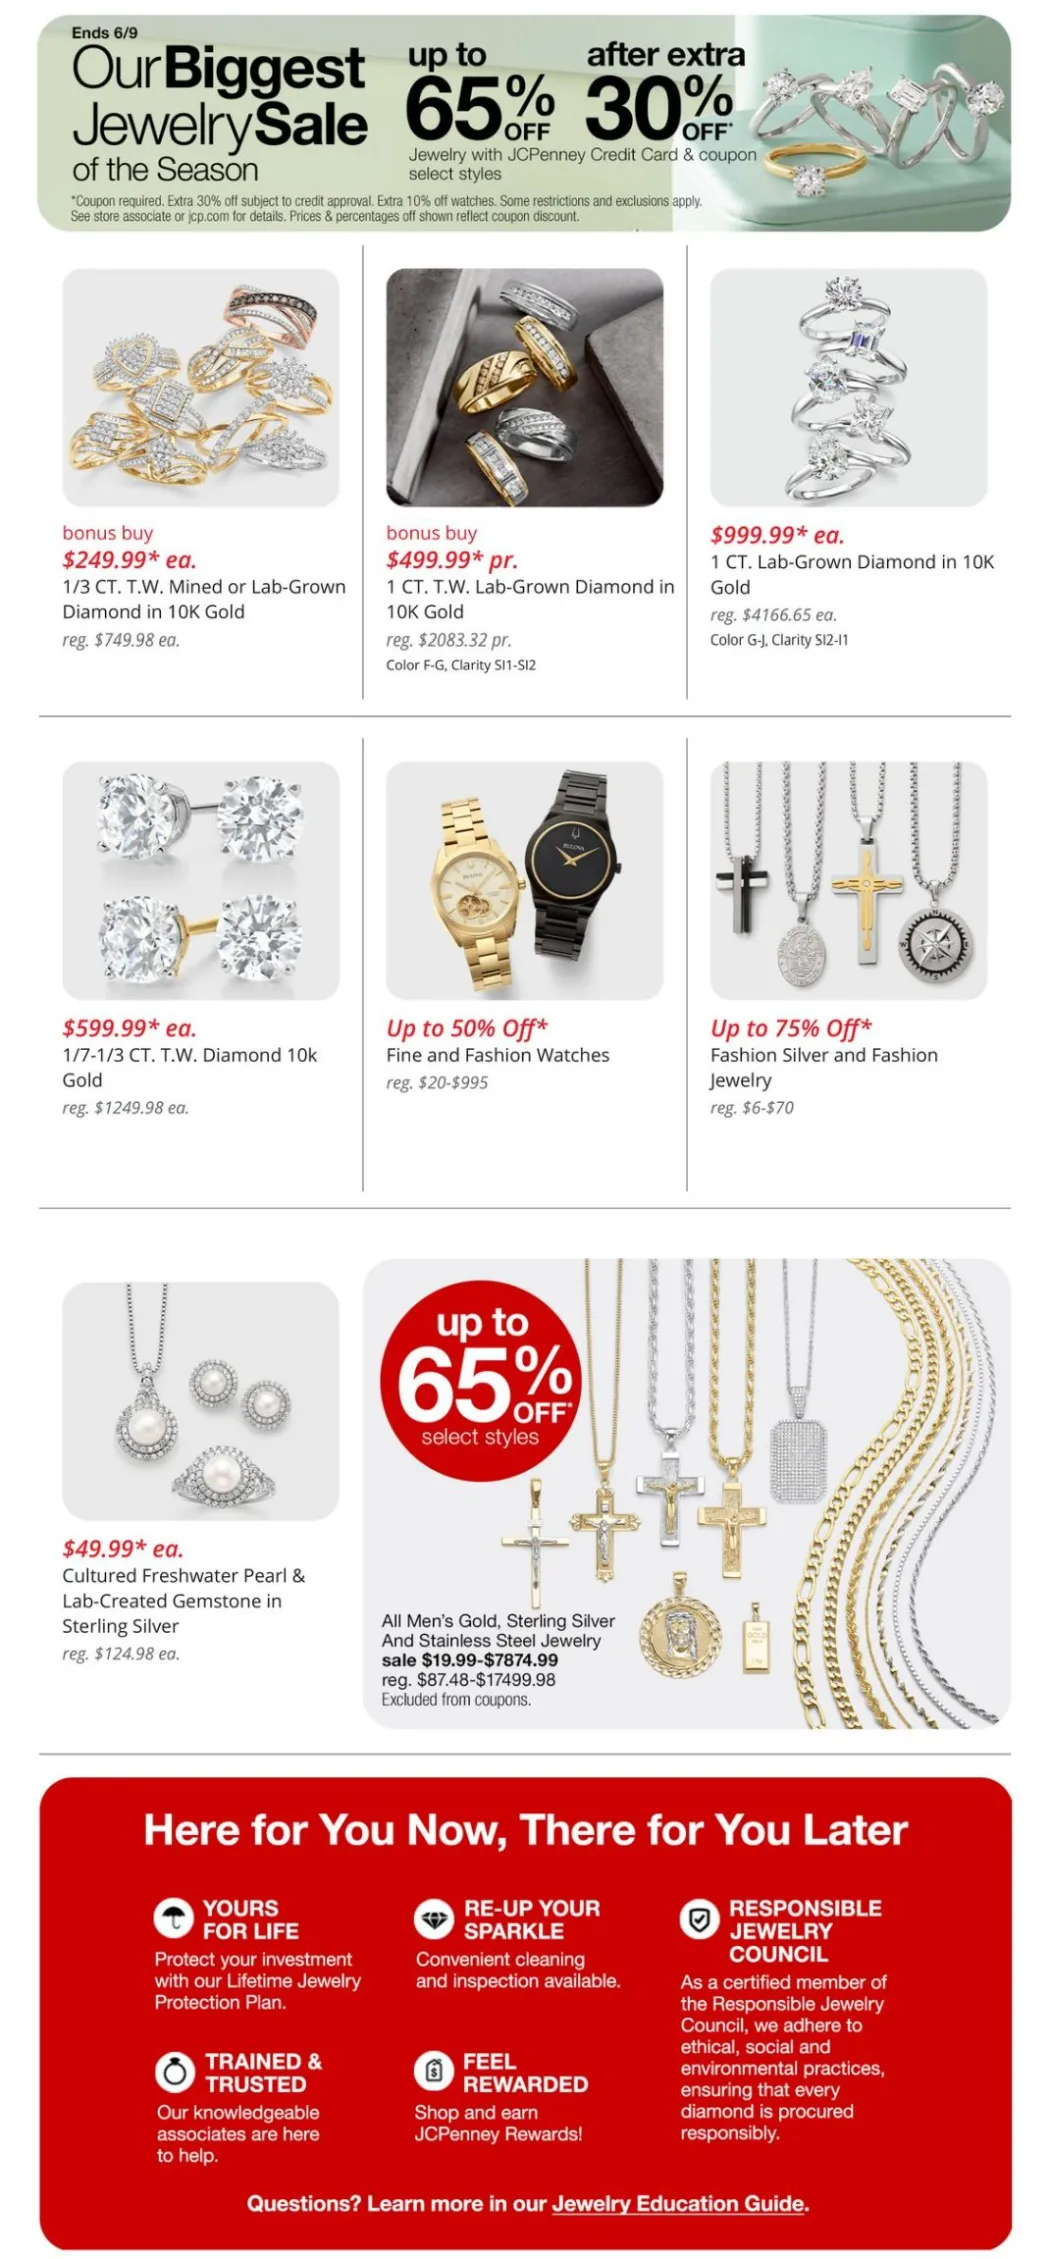 JCPenney Weekly Ad July 2024 Weekly Sales, Deals, Discounts and Digital Coupons.